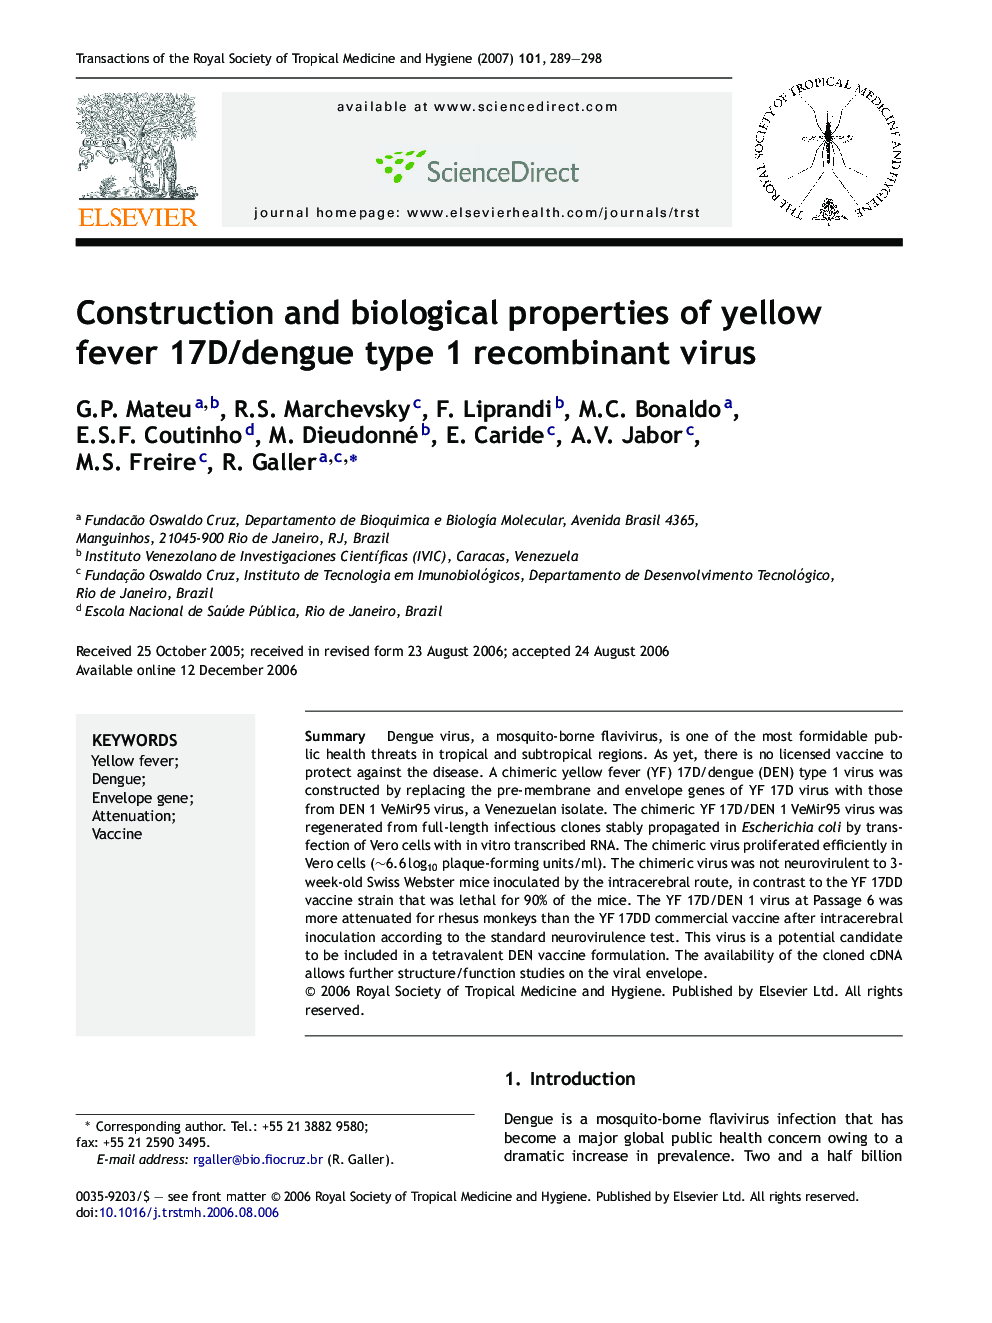 Construction and biological properties of yellow fever 17D/dengue type 1 recombinant virus